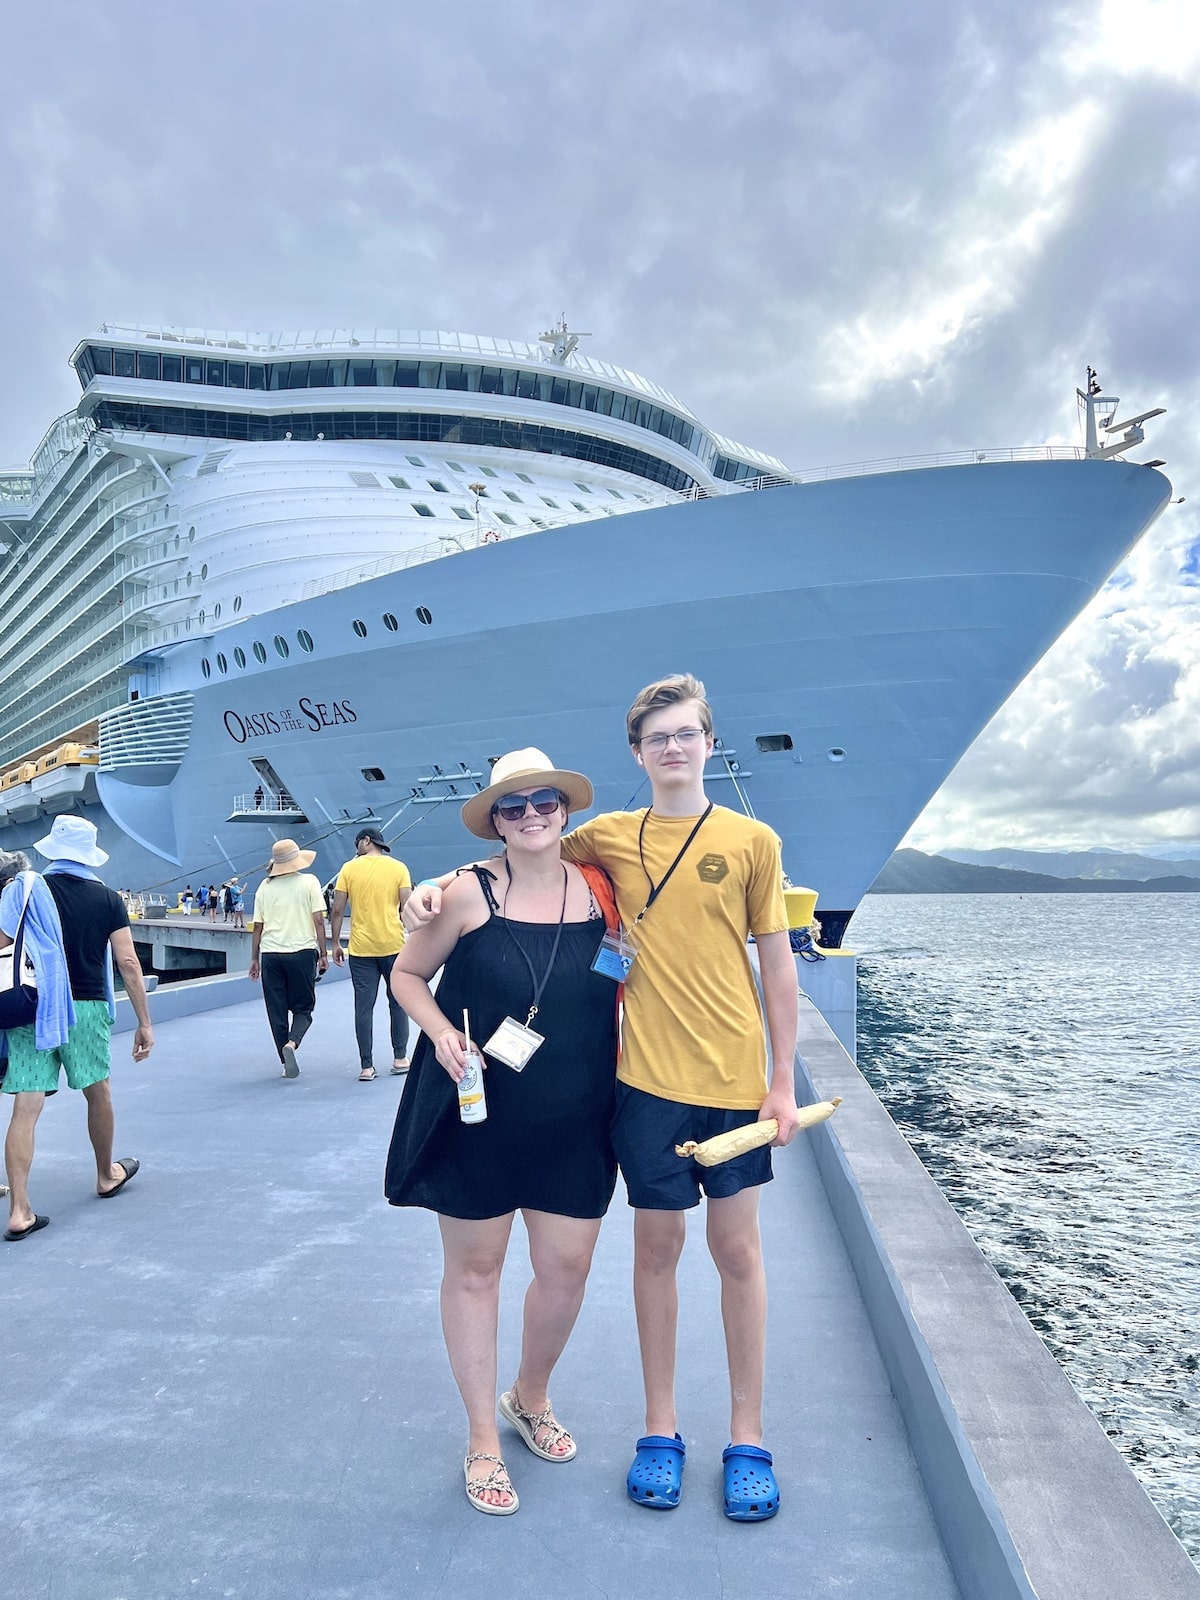 Two people standing in front of a cruise ship.